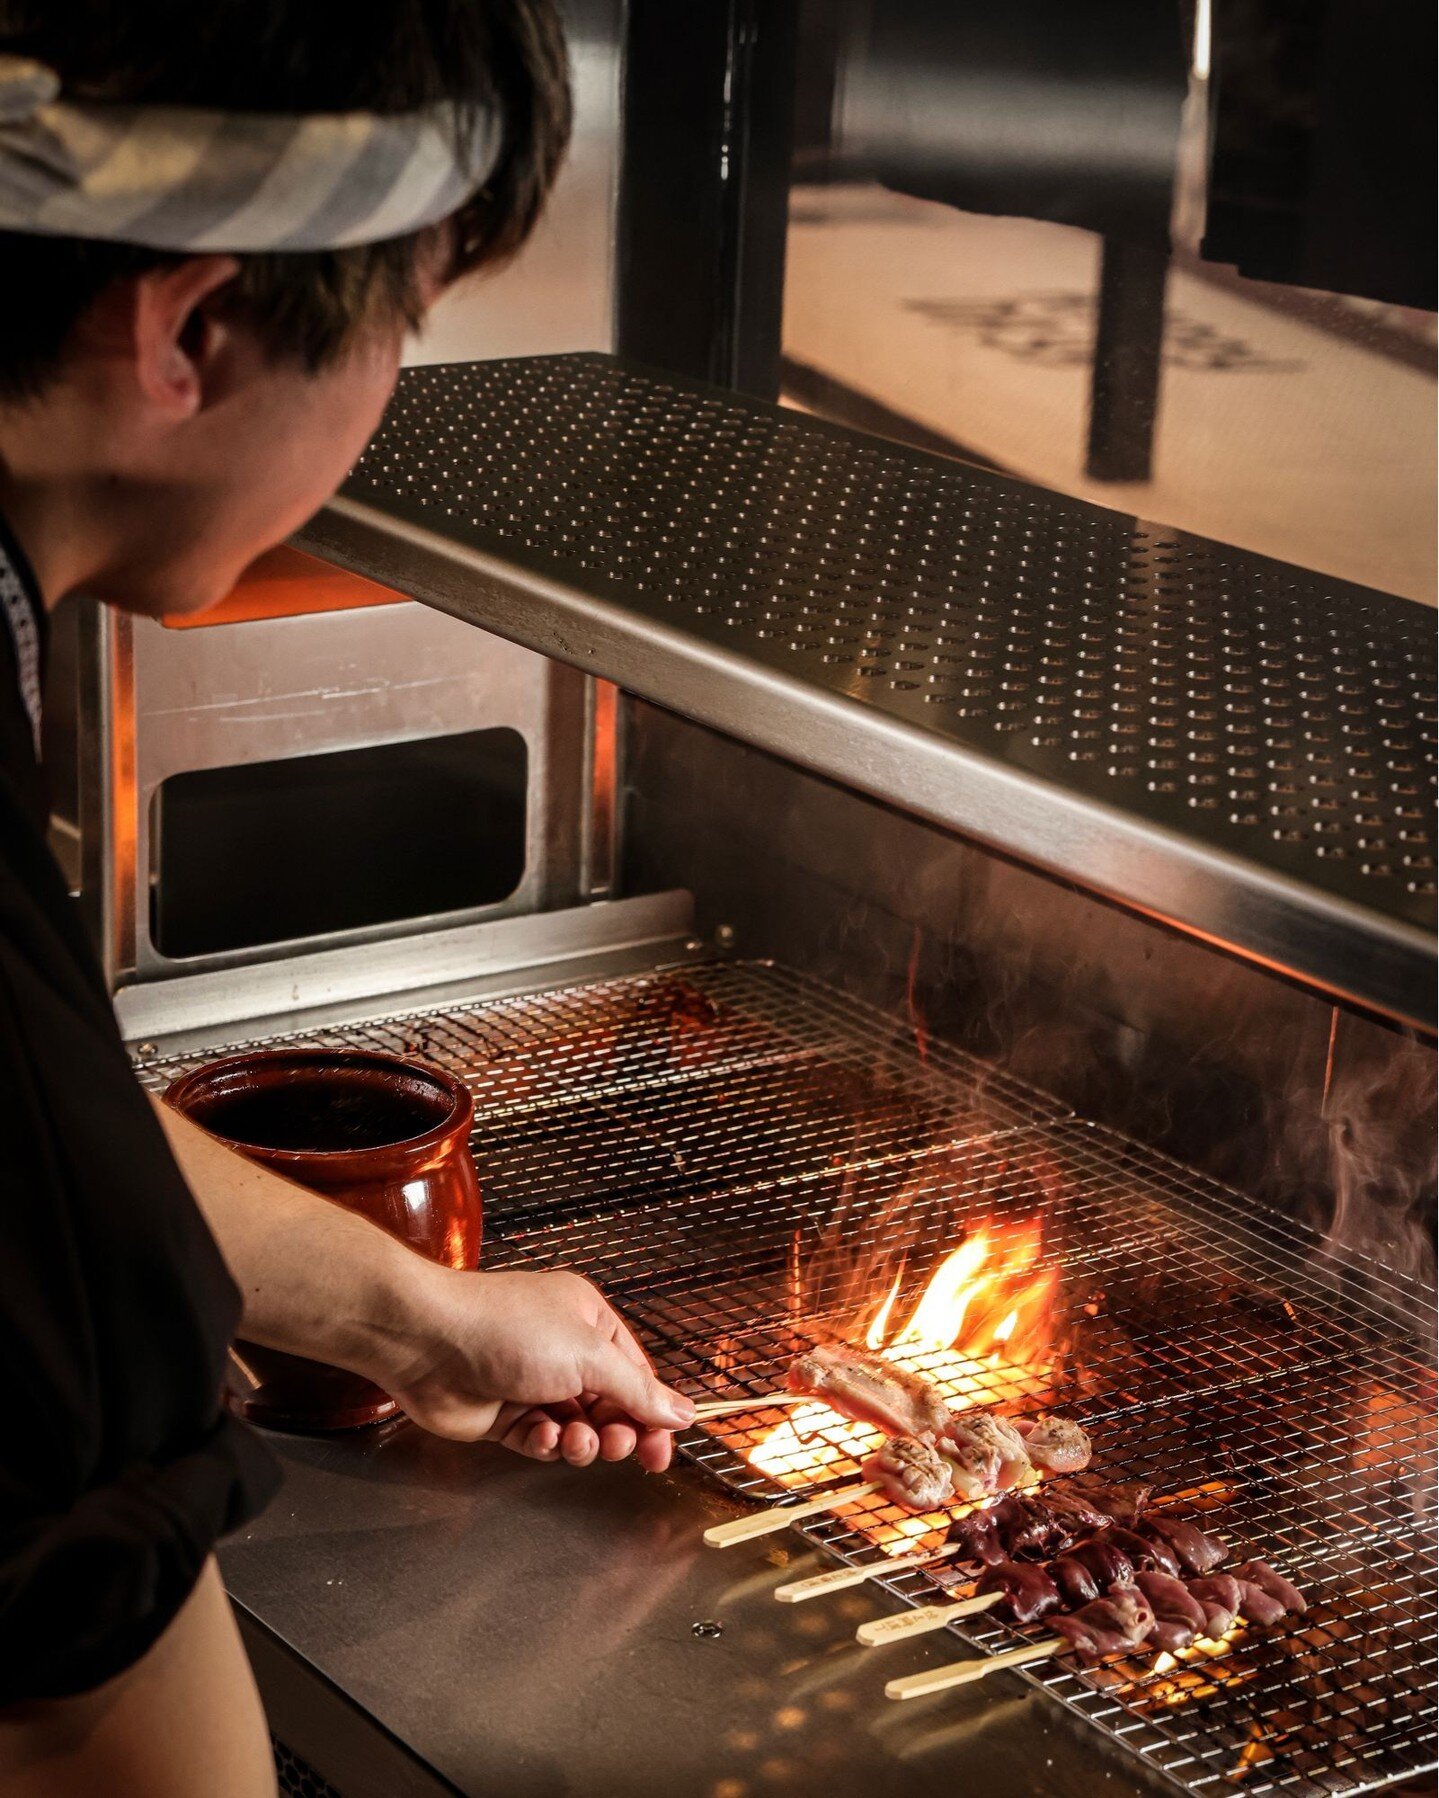 Visit us this week and watch our chefs skillfully grill your order👨&zwj;🍳🍢🔥

Regent Place | Walk-in only
Fiery actions start at 4 PM 🔥 

-
#yakitoriyokocho #japaneserestaurant #regentplace #sydneyrestaurant #sydneyeats #yakitori #japanesefood #s